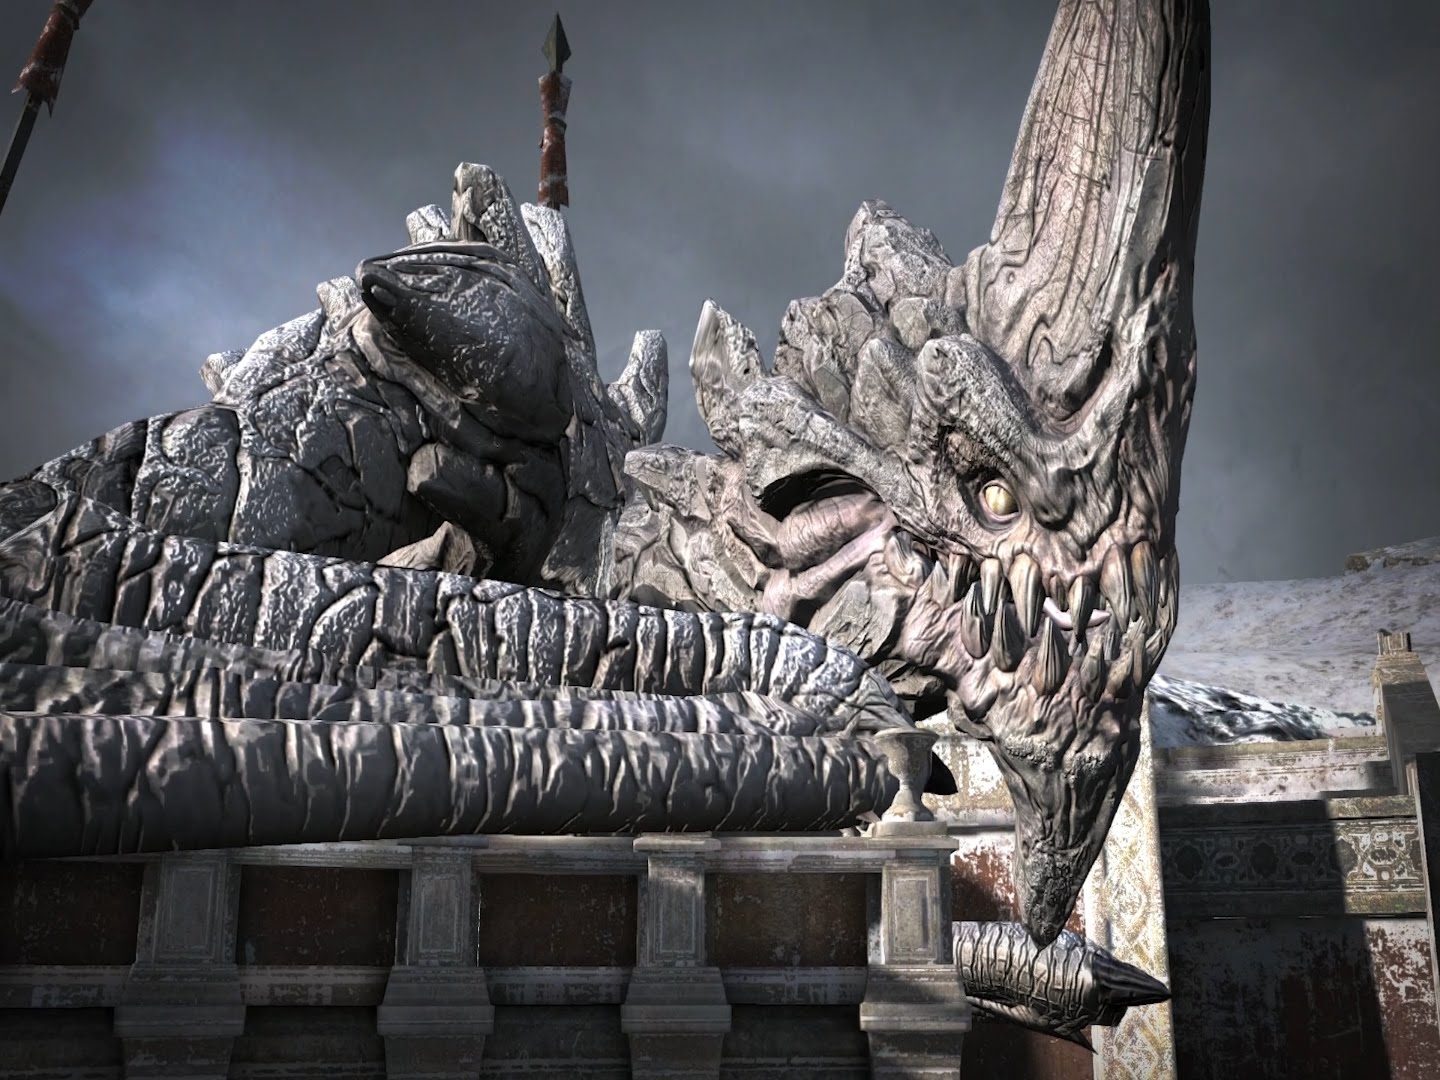 Infinity Blade III: Kingdom Come Ends the Trilogy Sept 4th